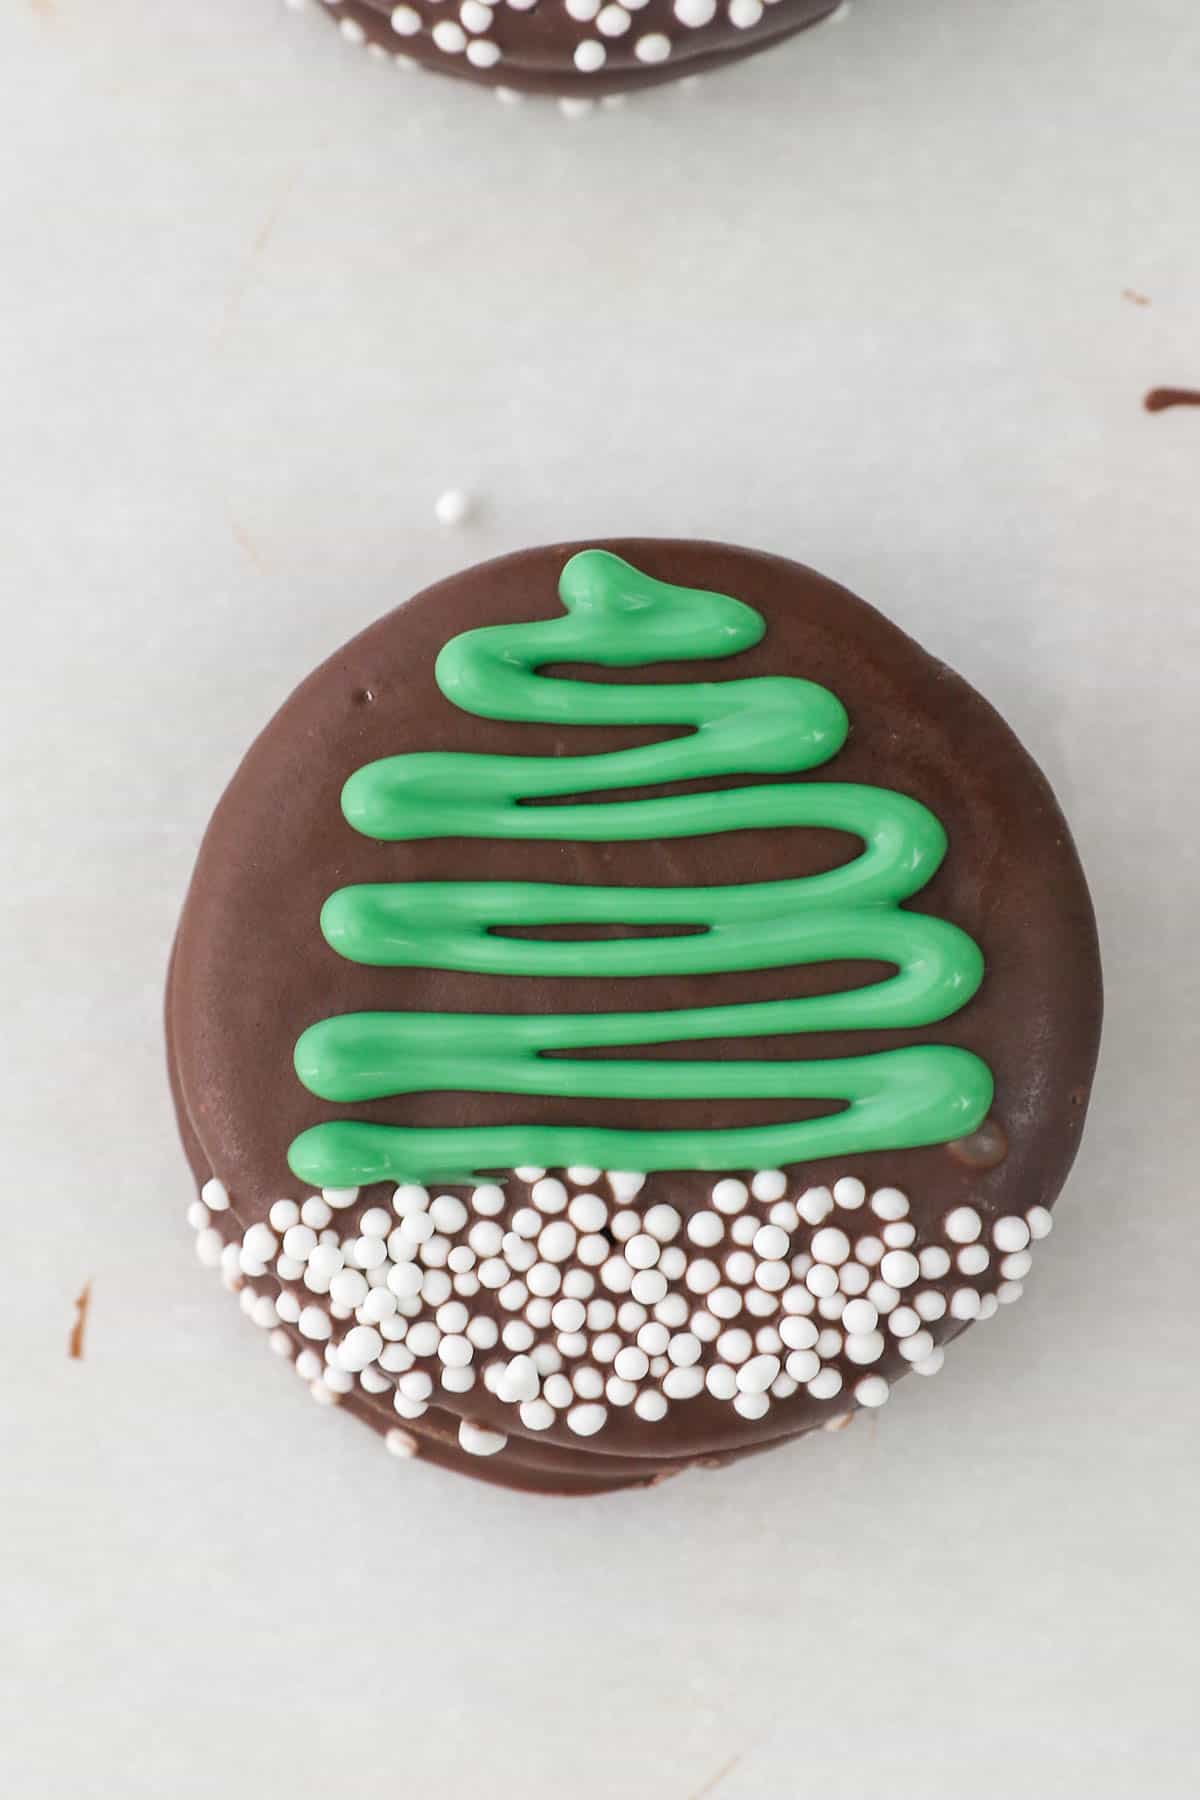 A Christmas Oreo decorated with a piped green Christmas tree and white sprinkles.